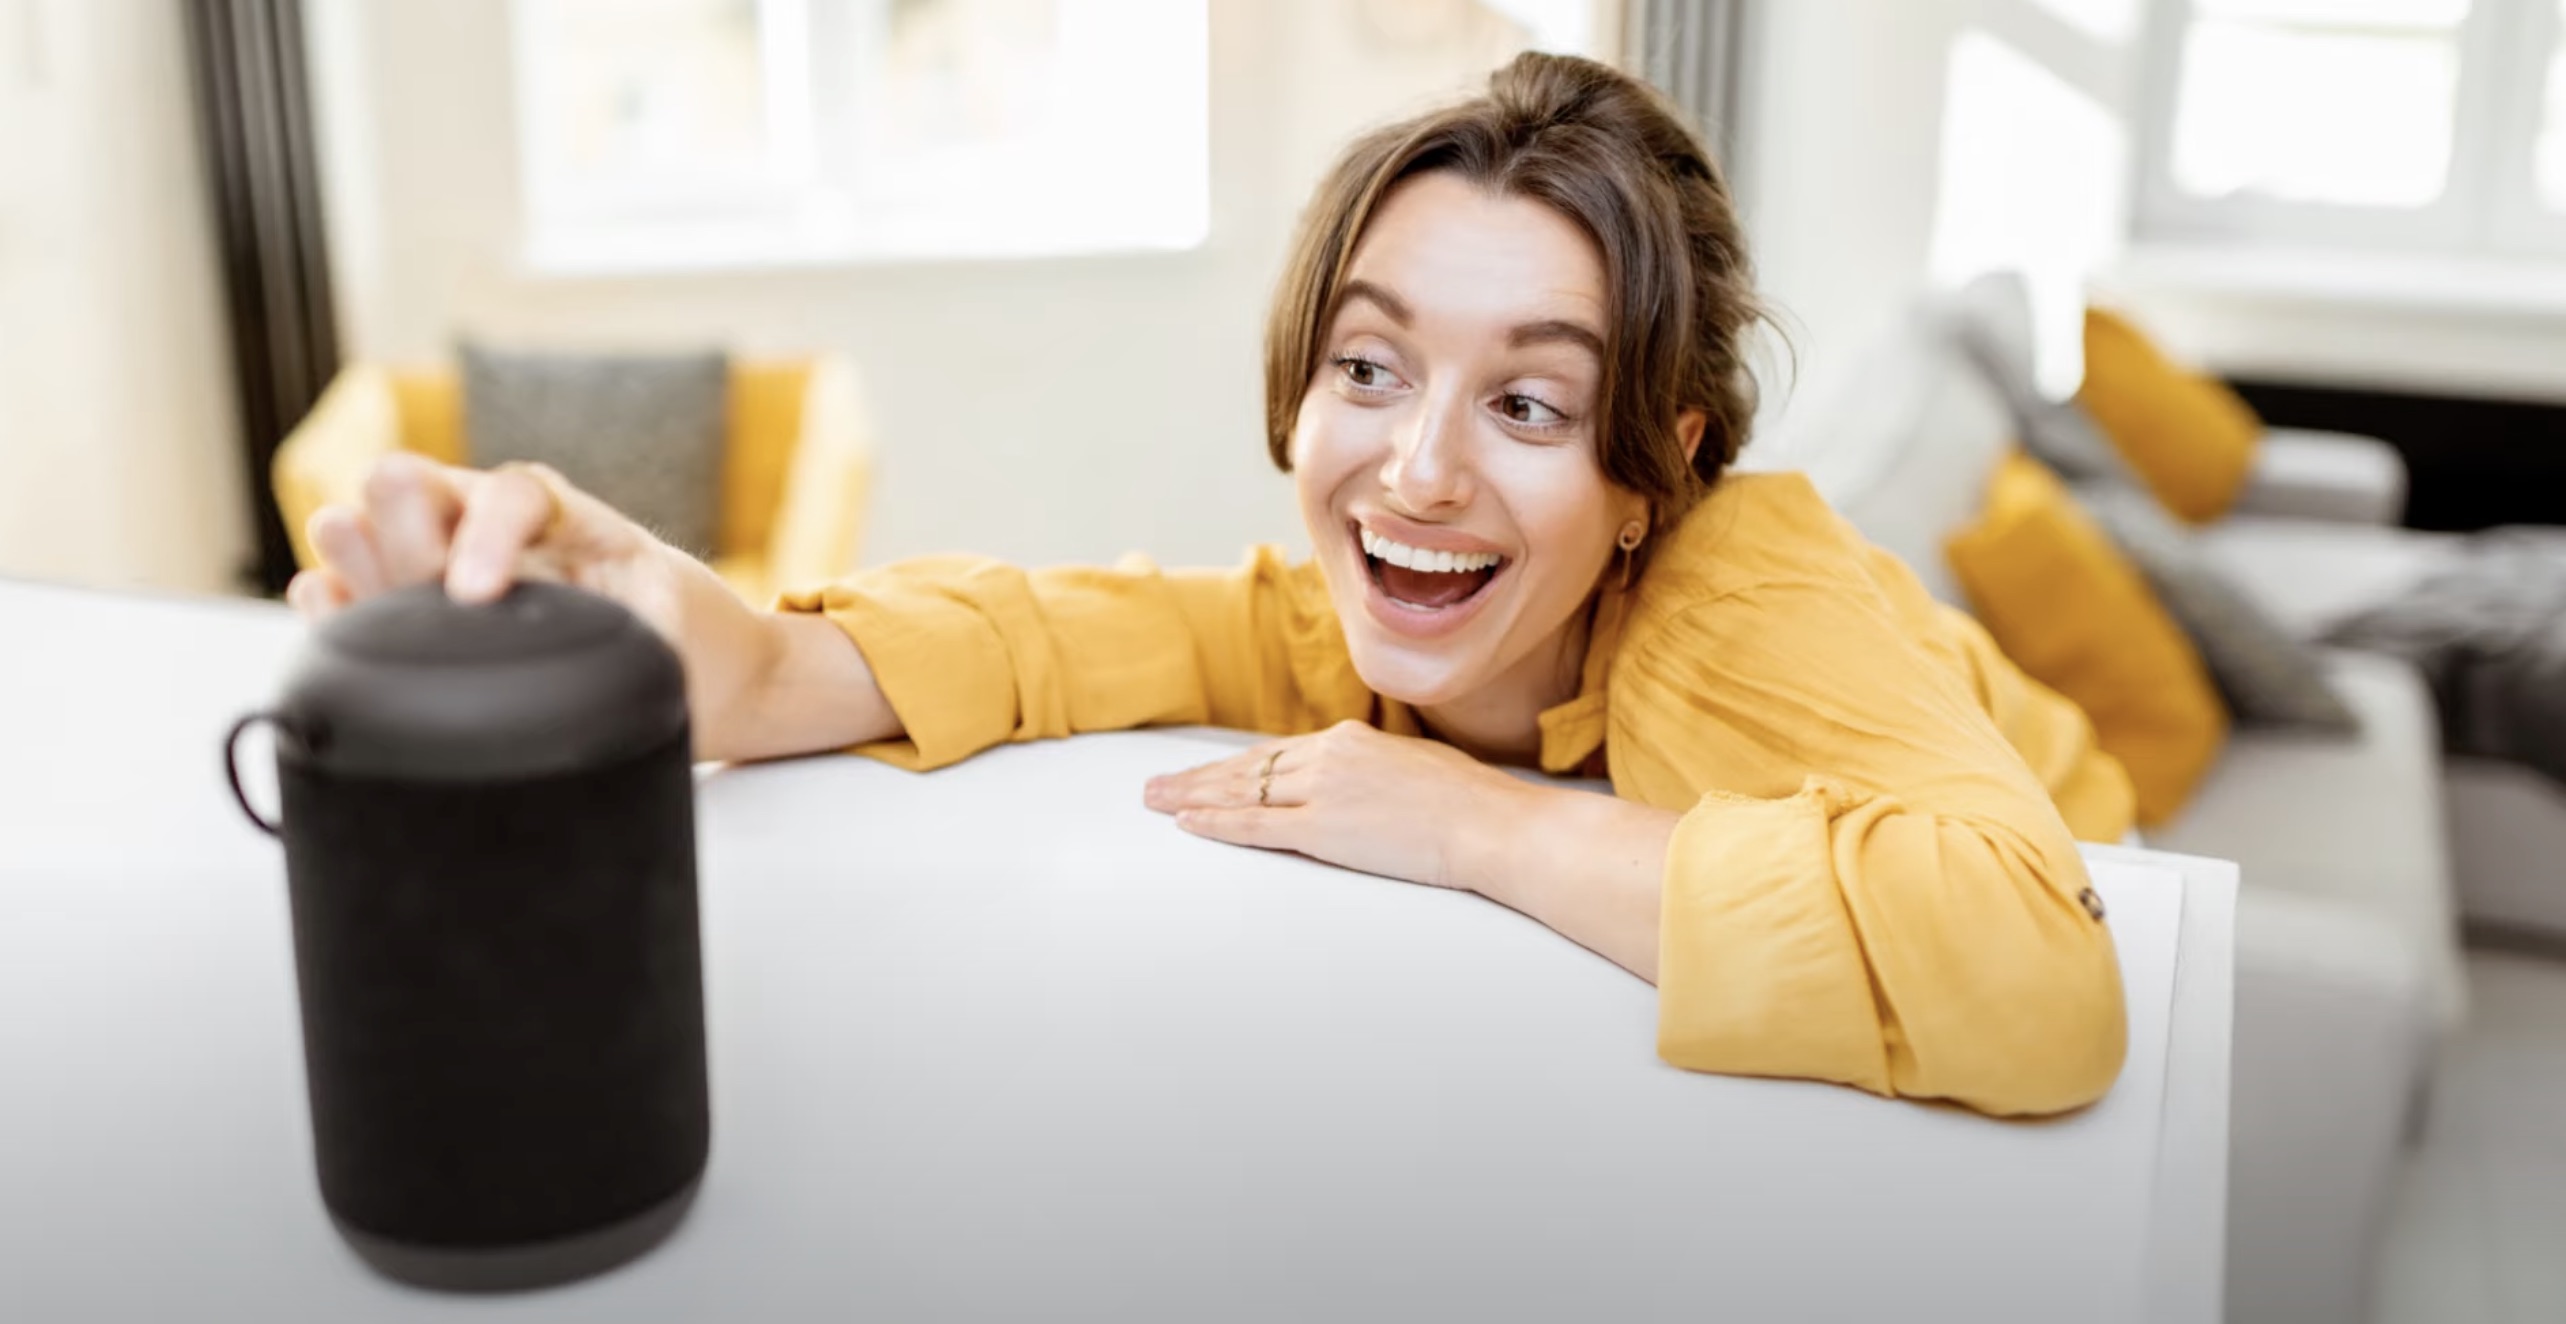 How To Get Alexa To Call You A Different Name